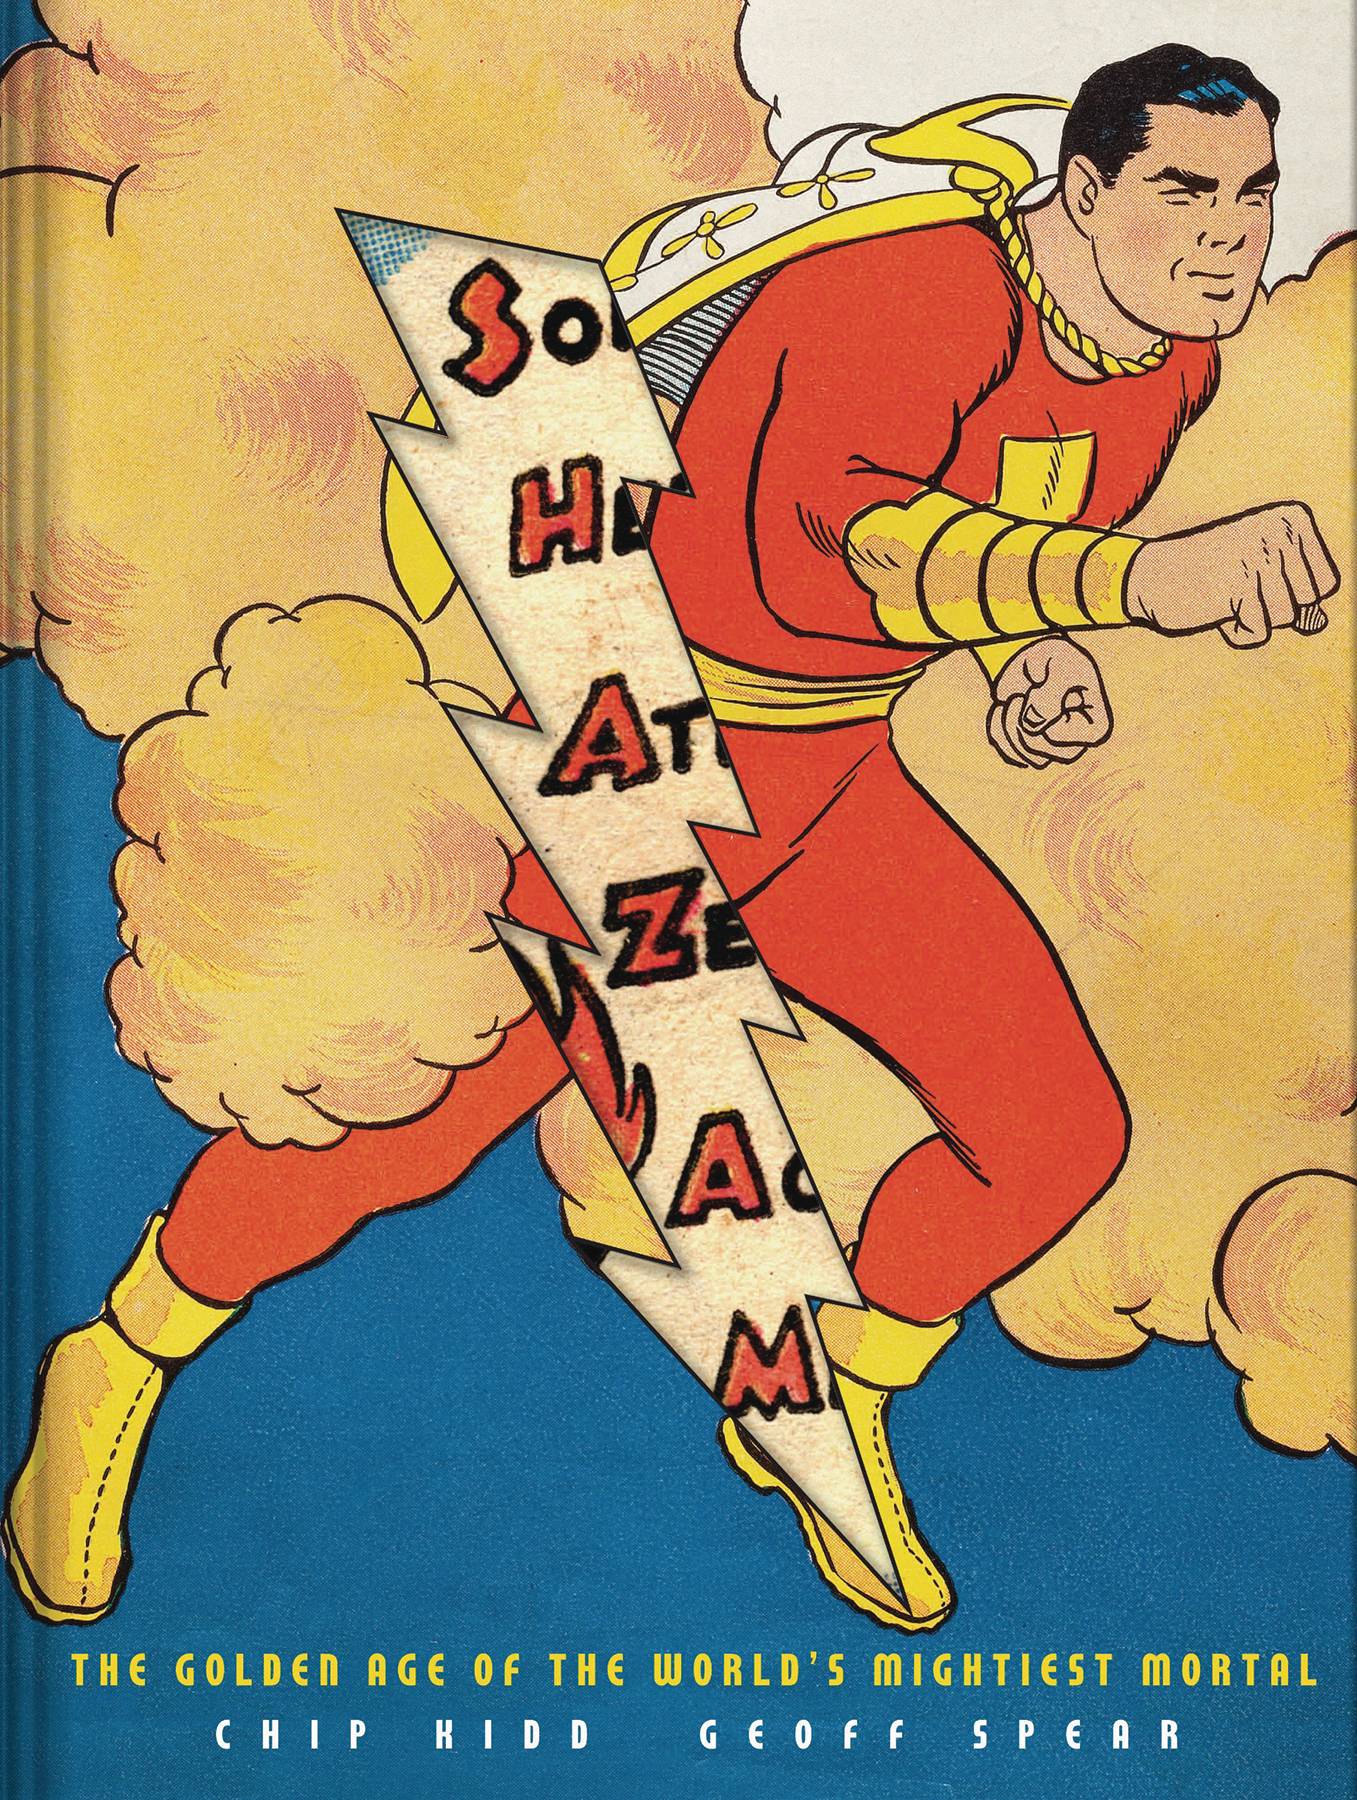 SHAZAM: THE GOLDEN AGE OF THE WORLD'S MIGHTEST MORTAL